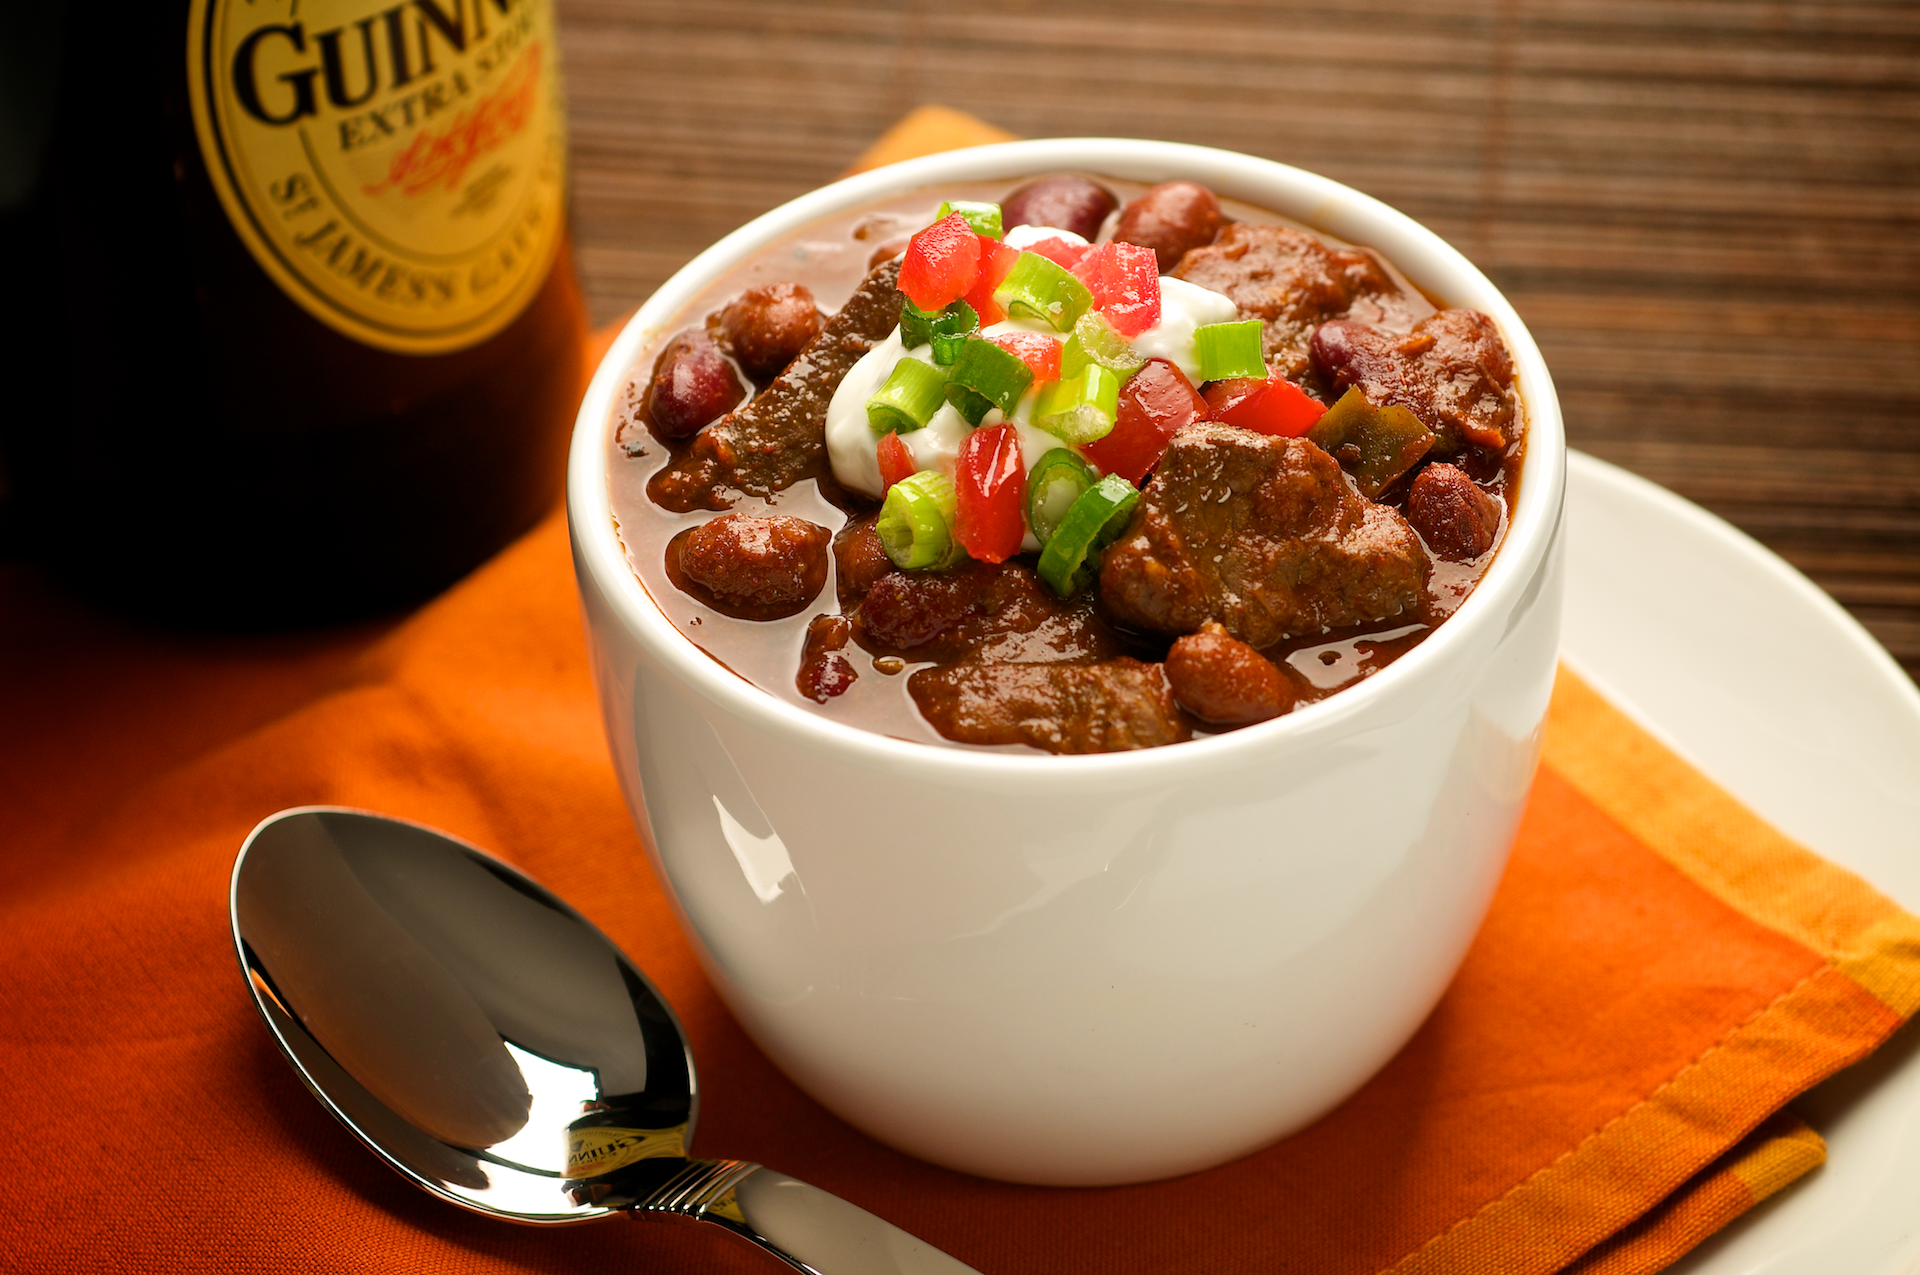 Hearty, spicy chili made with tender steak. Who can resist? This recipe yields a gallon for the game-time gang.